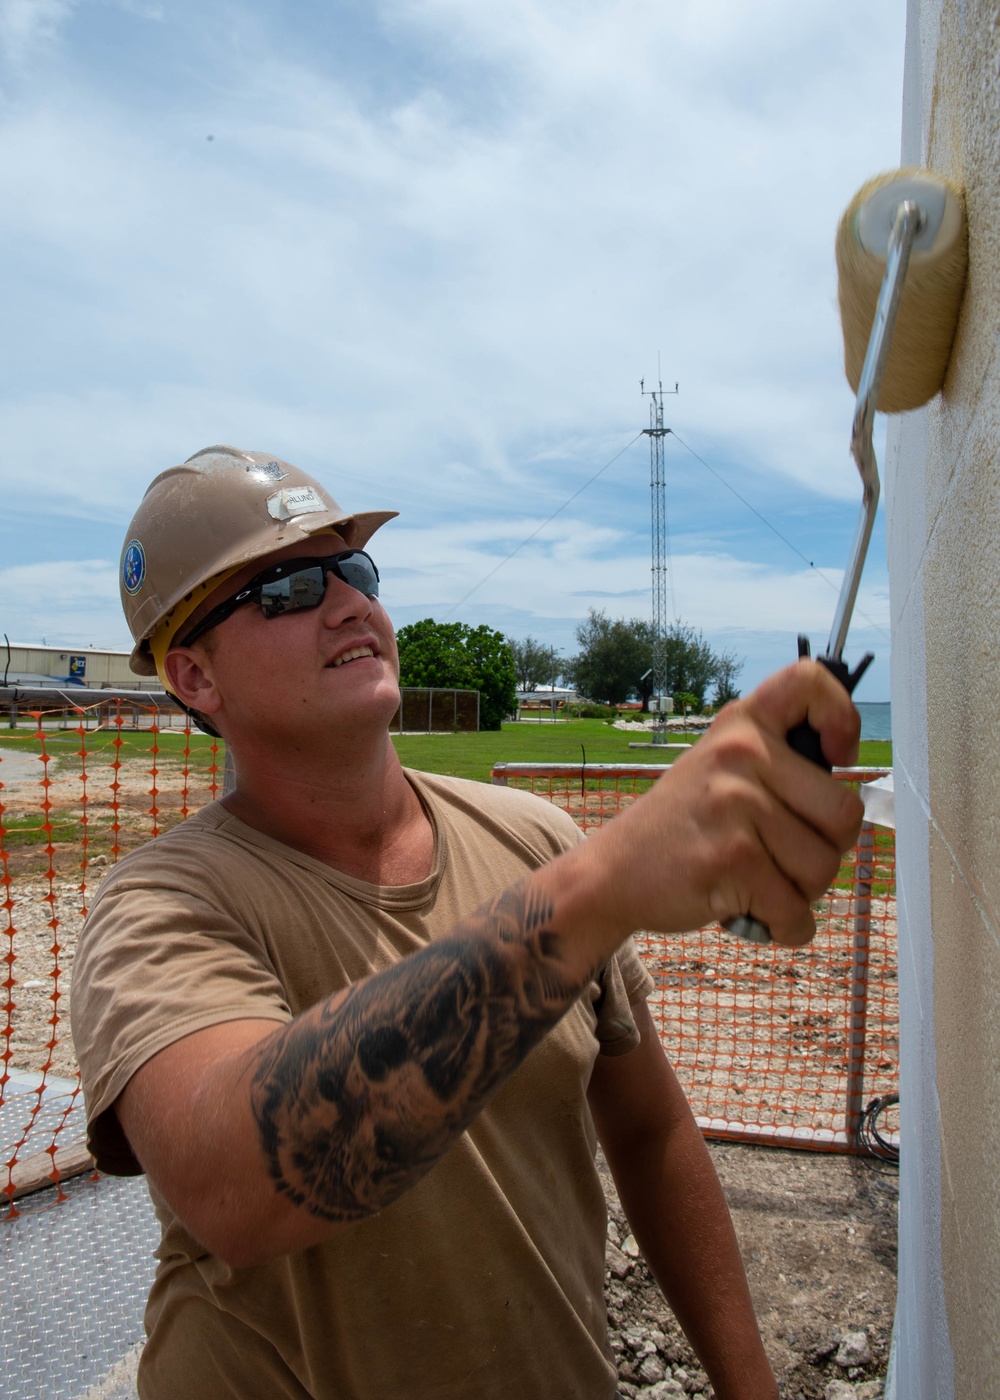 Seabees Continue Construction at Polaris Point